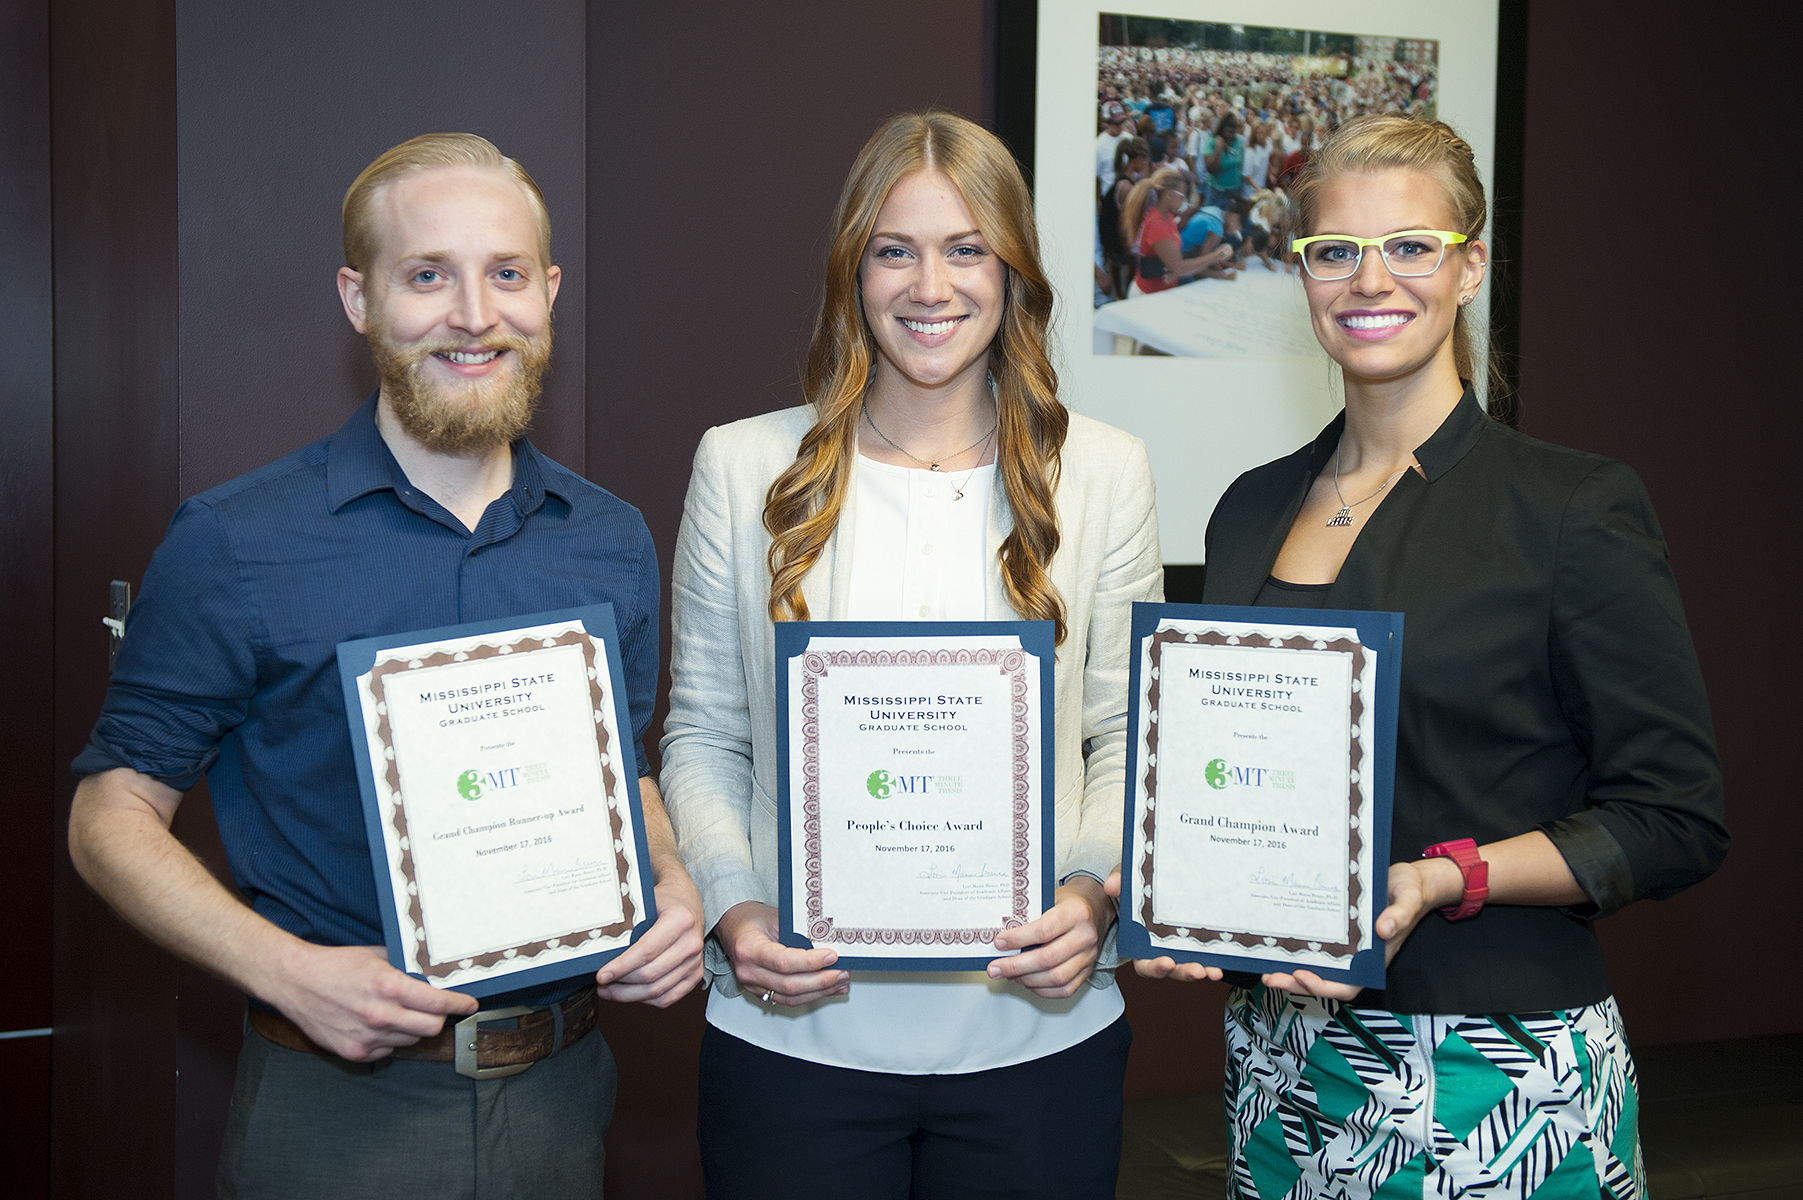 Award winners at MSU’s fourth annual Three Minute Thesis competition included, from left, David S. Mason, a master’s student in biological sciences/botany, Grand Champion Runner-Up; Abbey E. Wilson, a life sciences/animal physiology doctoral student, People’s Choice Award; and Caitlin J. Wenzel, a master’s student studying veterinary medical science, Grand Champion. (Photo by Russ Houston) 